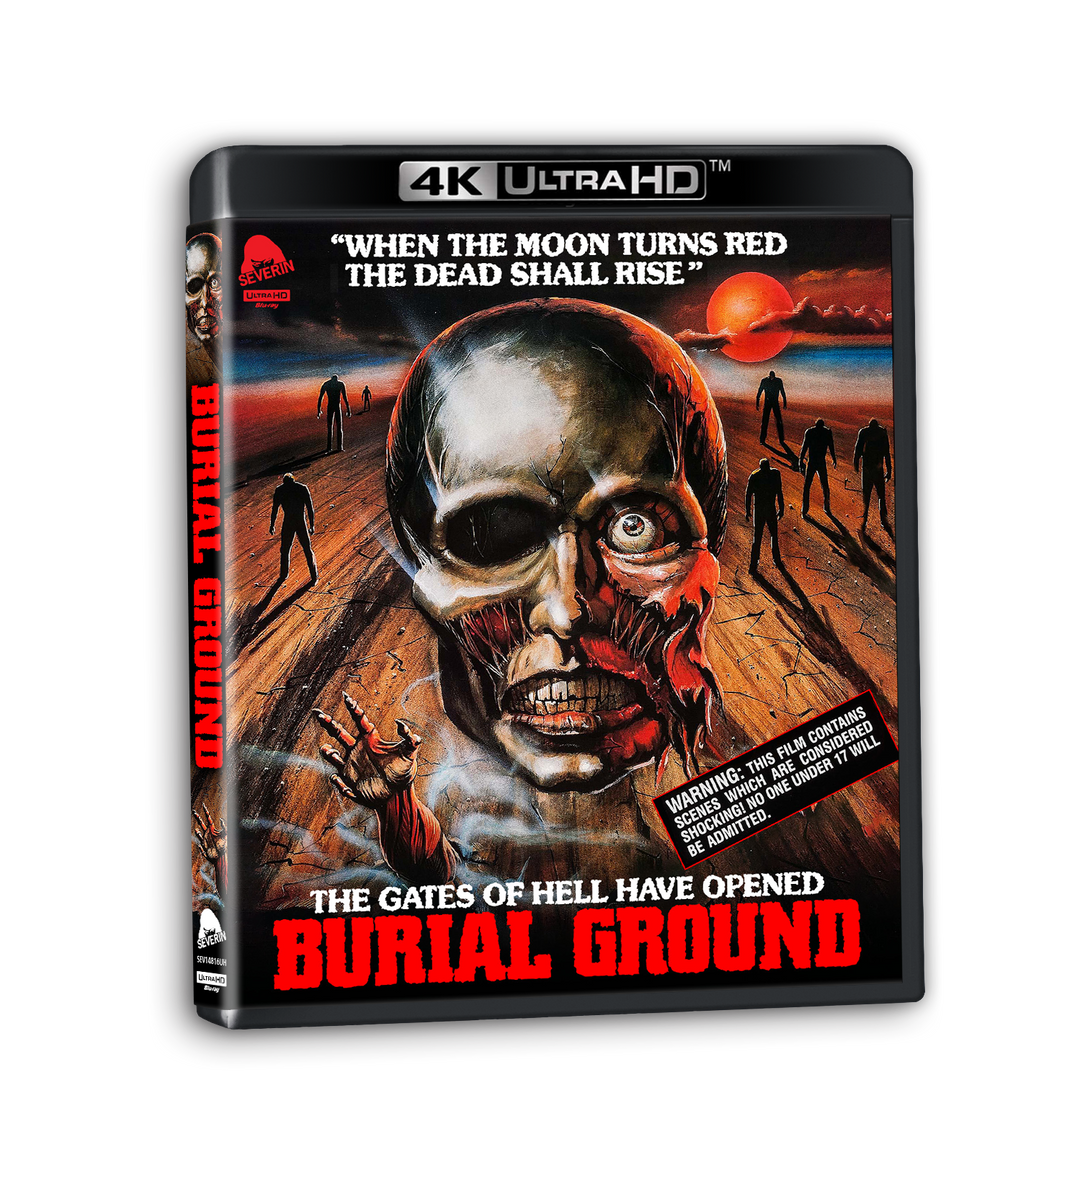 The Dead One [Blu-ray w/Exclusive Slipcover] – Severin Films